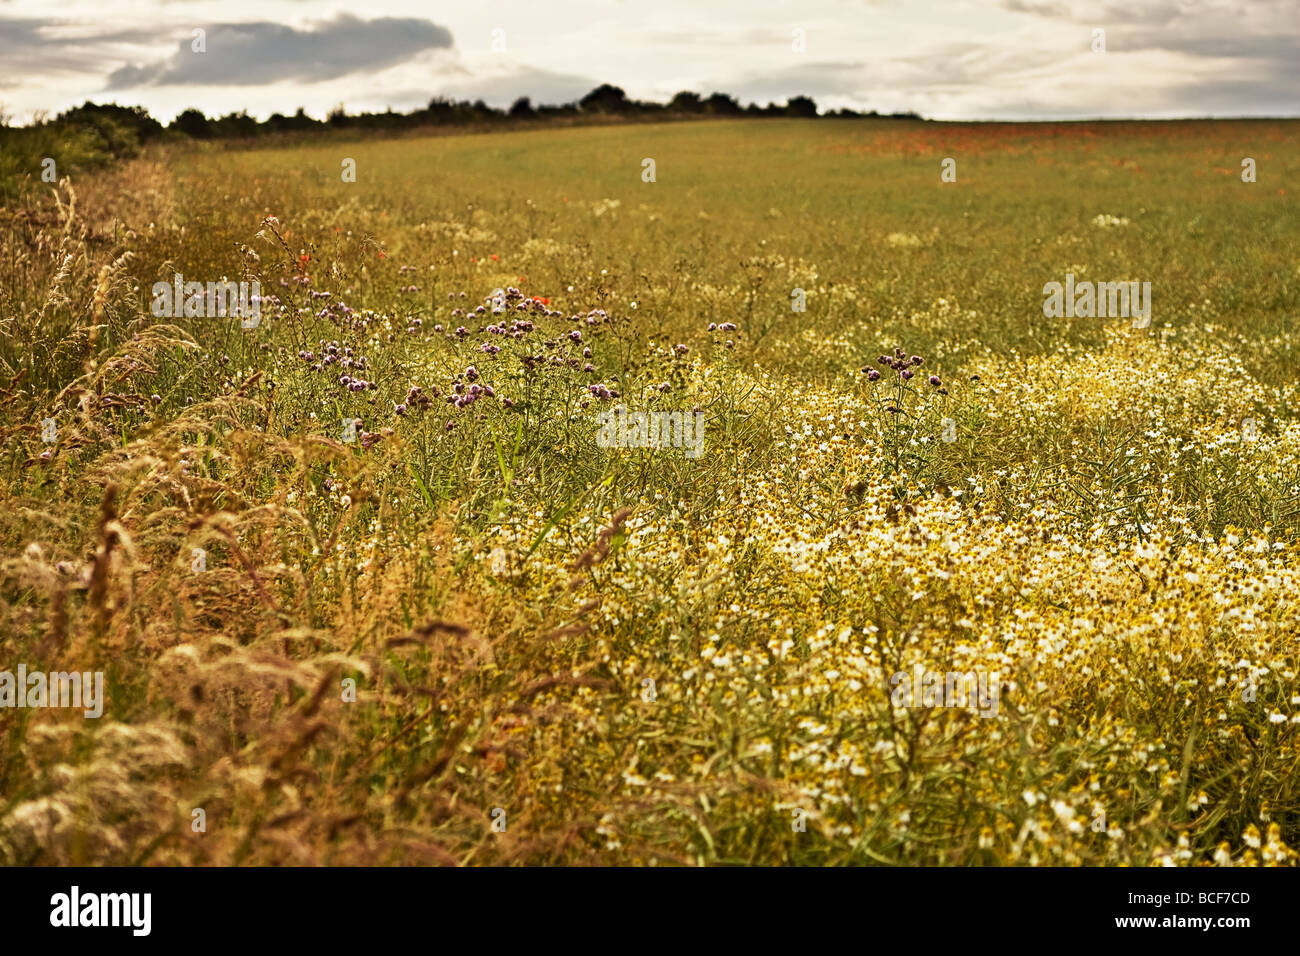 Photograph of a hedgerow bordering a field, showing various grasses and wild plants and flowers. Stock Photo